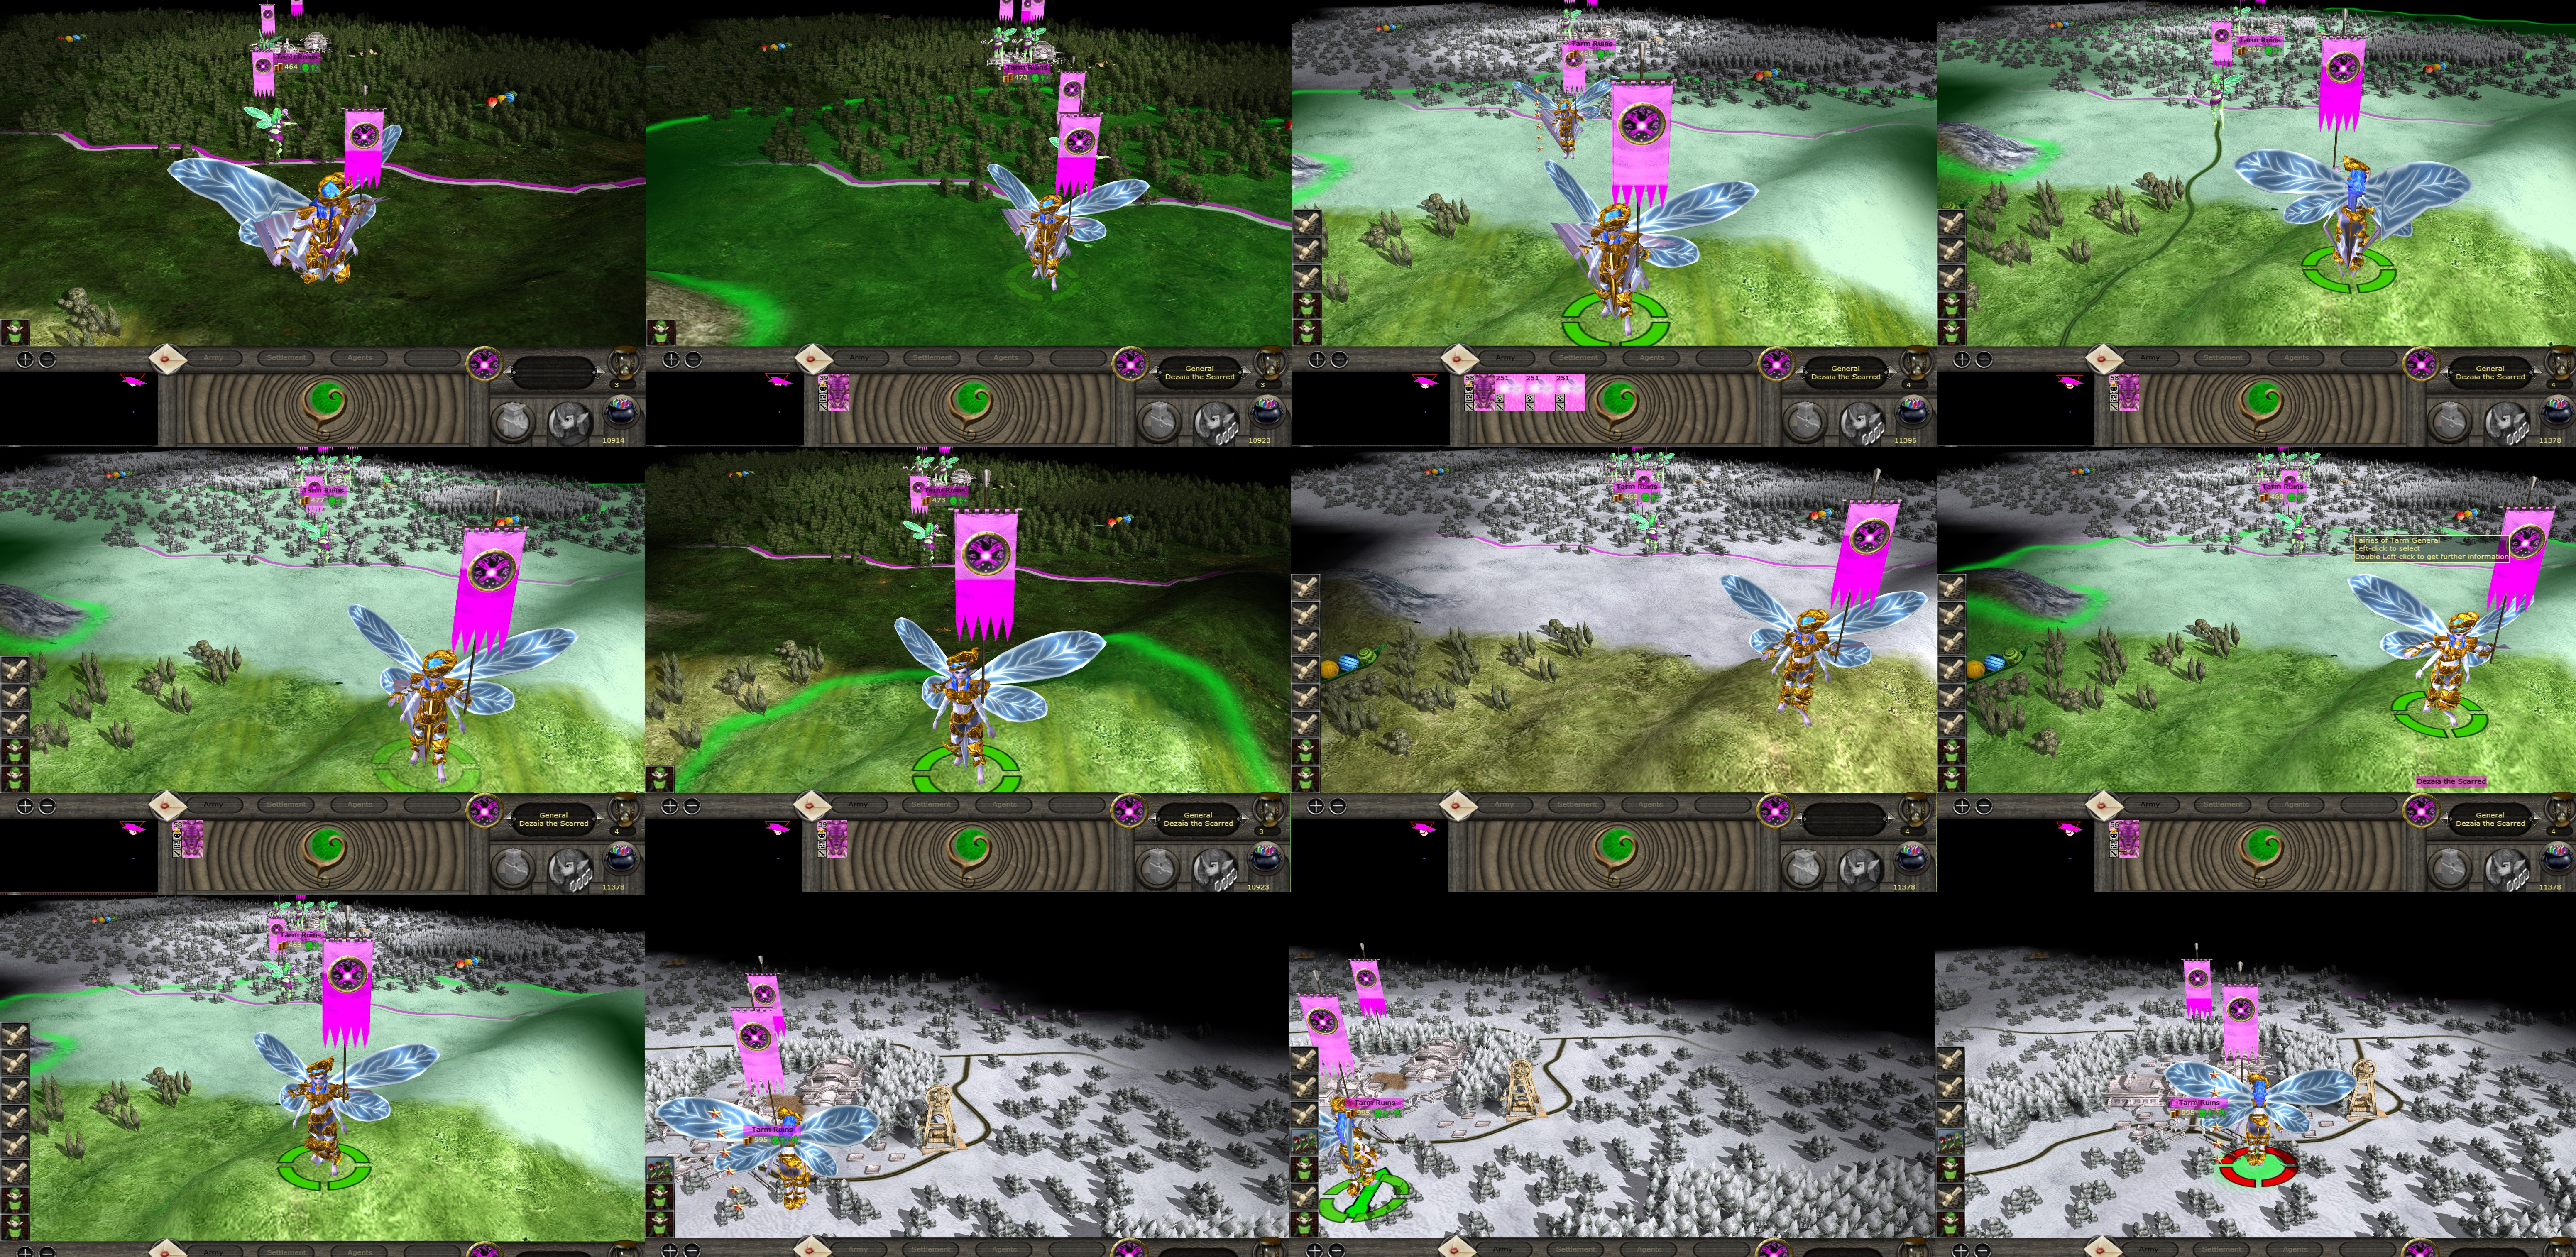 The Fairy General of the Fairies of Tarm-faction had a glitch!